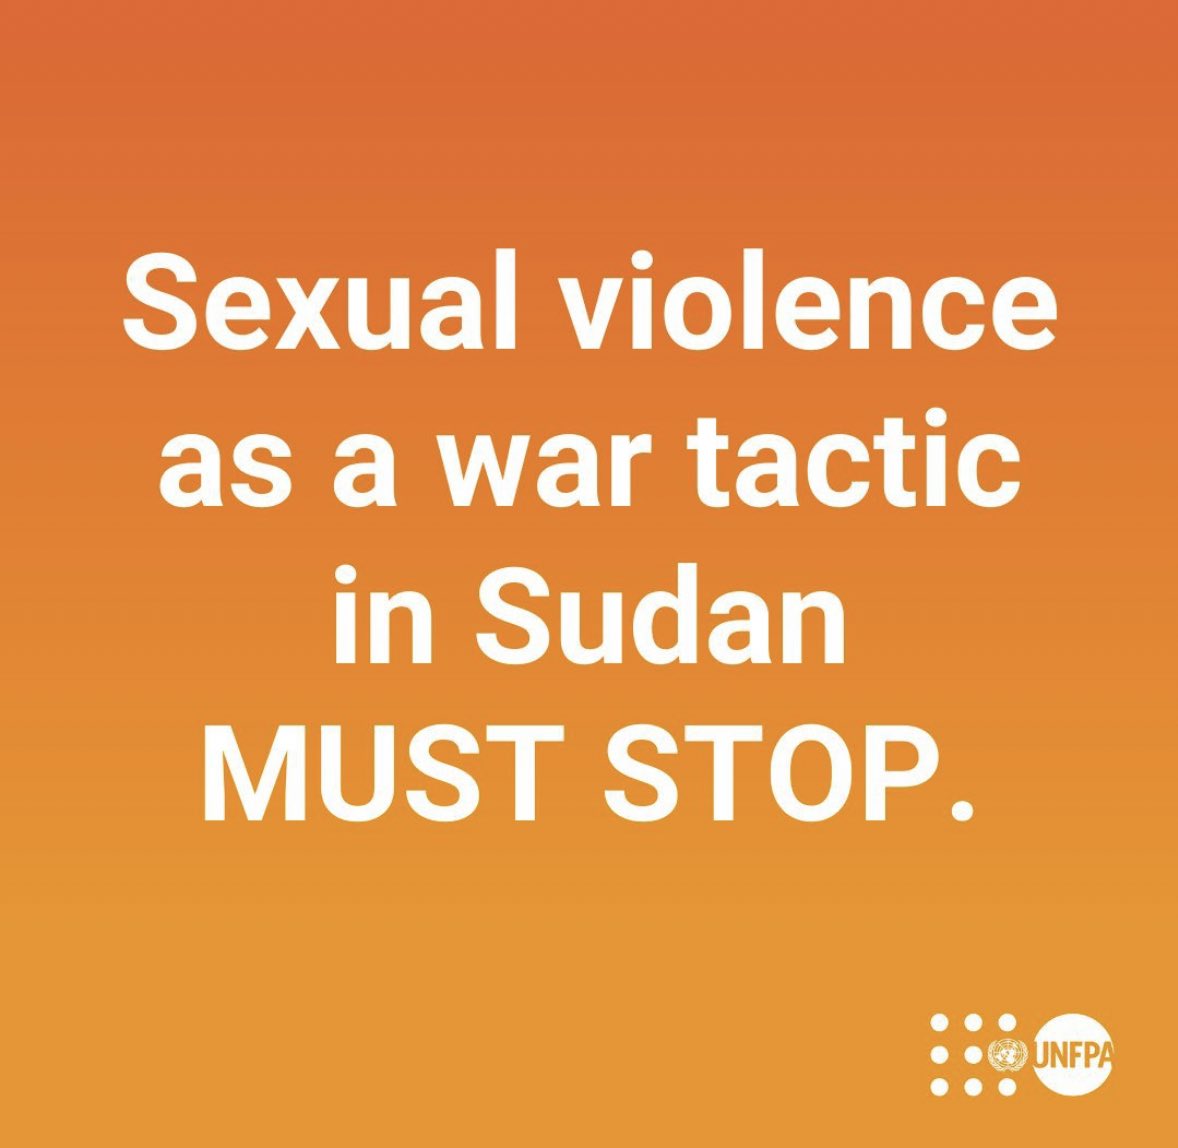 Staggering levels of violence, including sexual violence, in Sudan have inflicted an intolerable toll on women & girls It is imperative that such atrocities cease immediately, with perpetrators held to account and survivors provided with essential medical & psychosocial support.